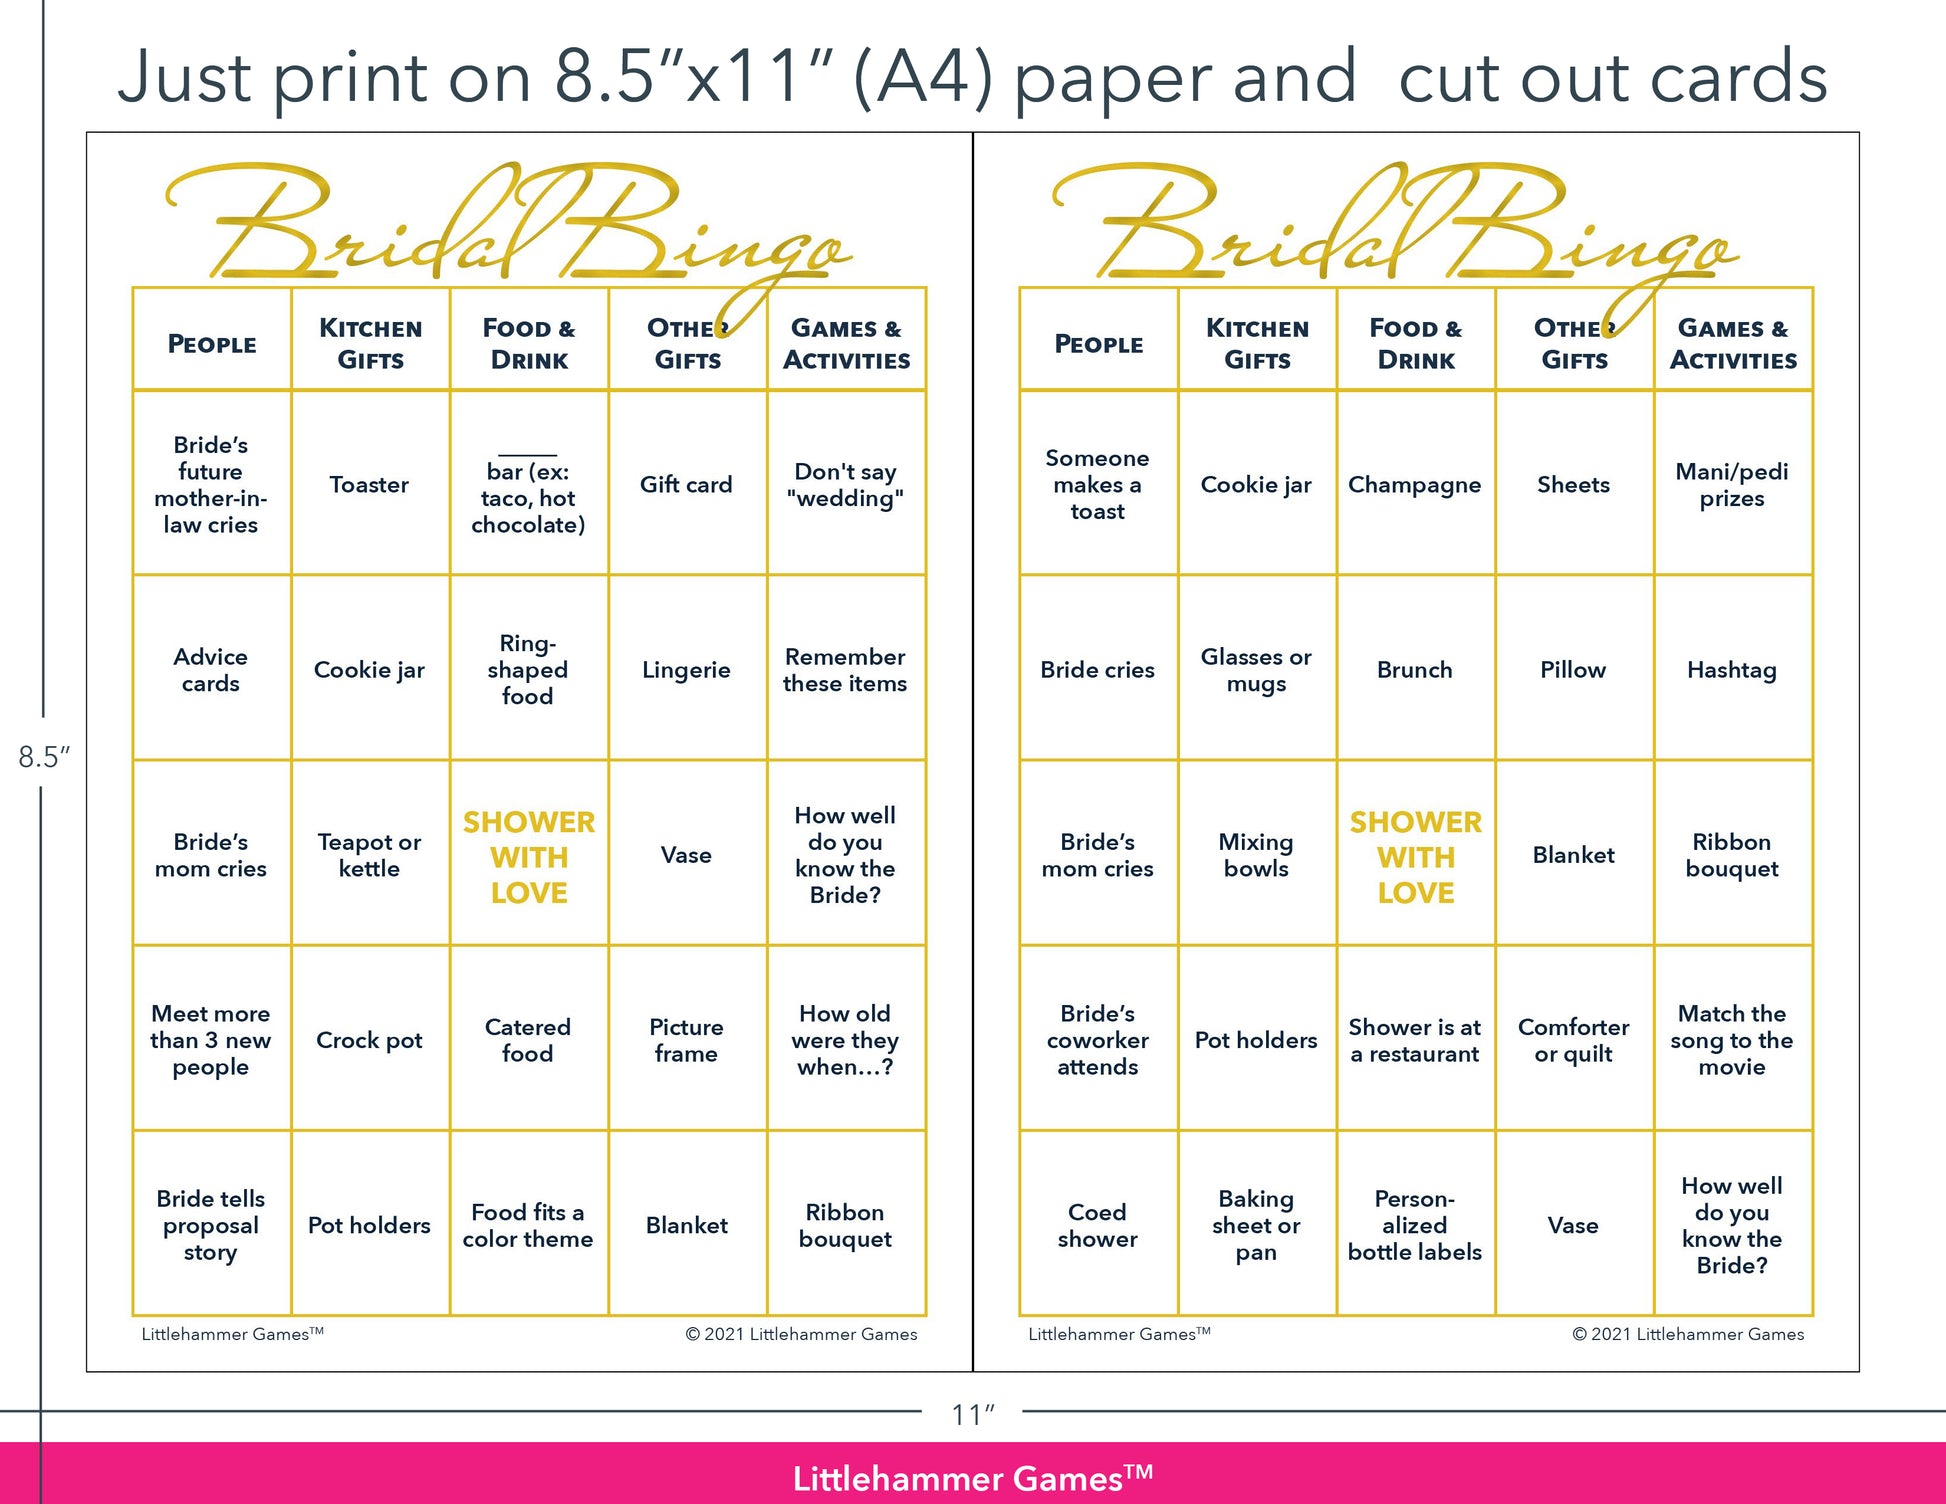 Gold and white Bridal Bingo game cards with printing instructions